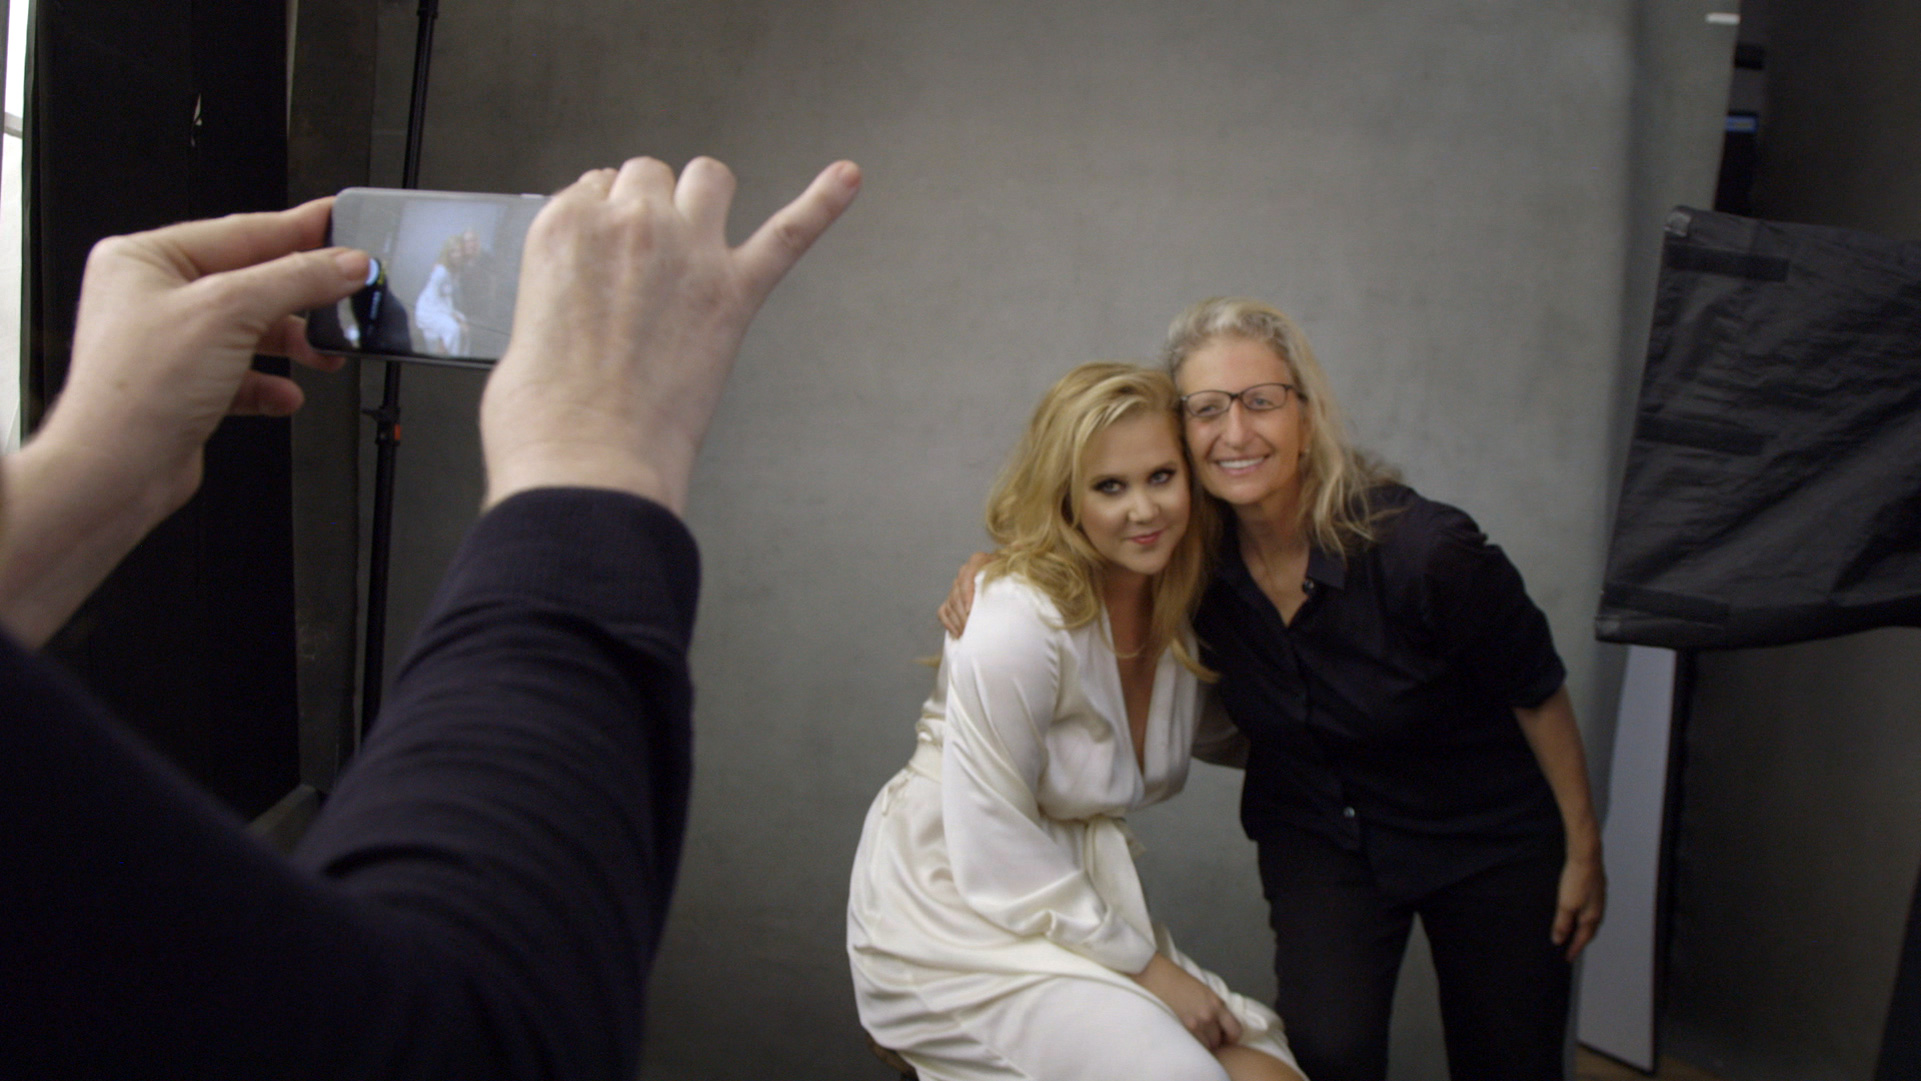 Amy Schumer and Annie Leibovitz behind the scenes for the 2016 Pirelli Calendar shoot.